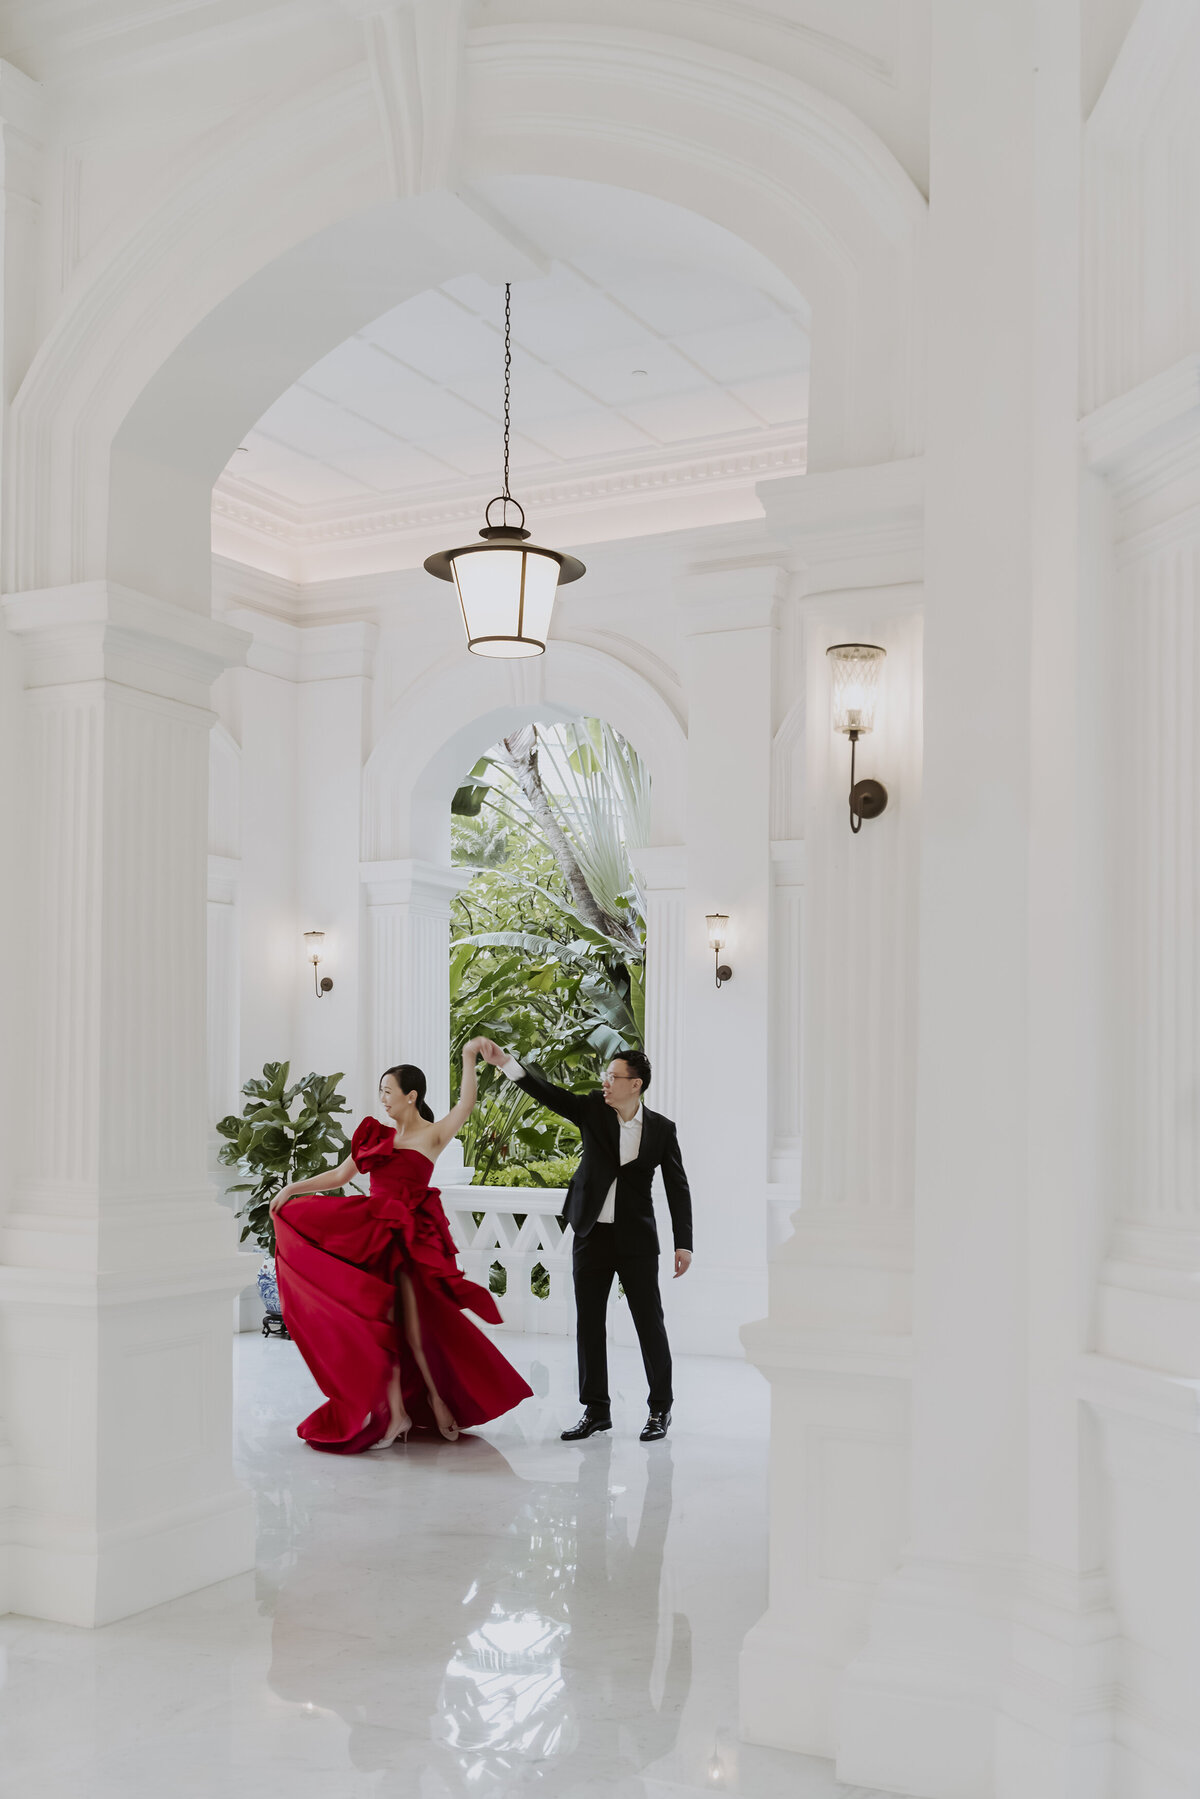 a man in a black suit spins a woman in a red dress in the raffles hotel